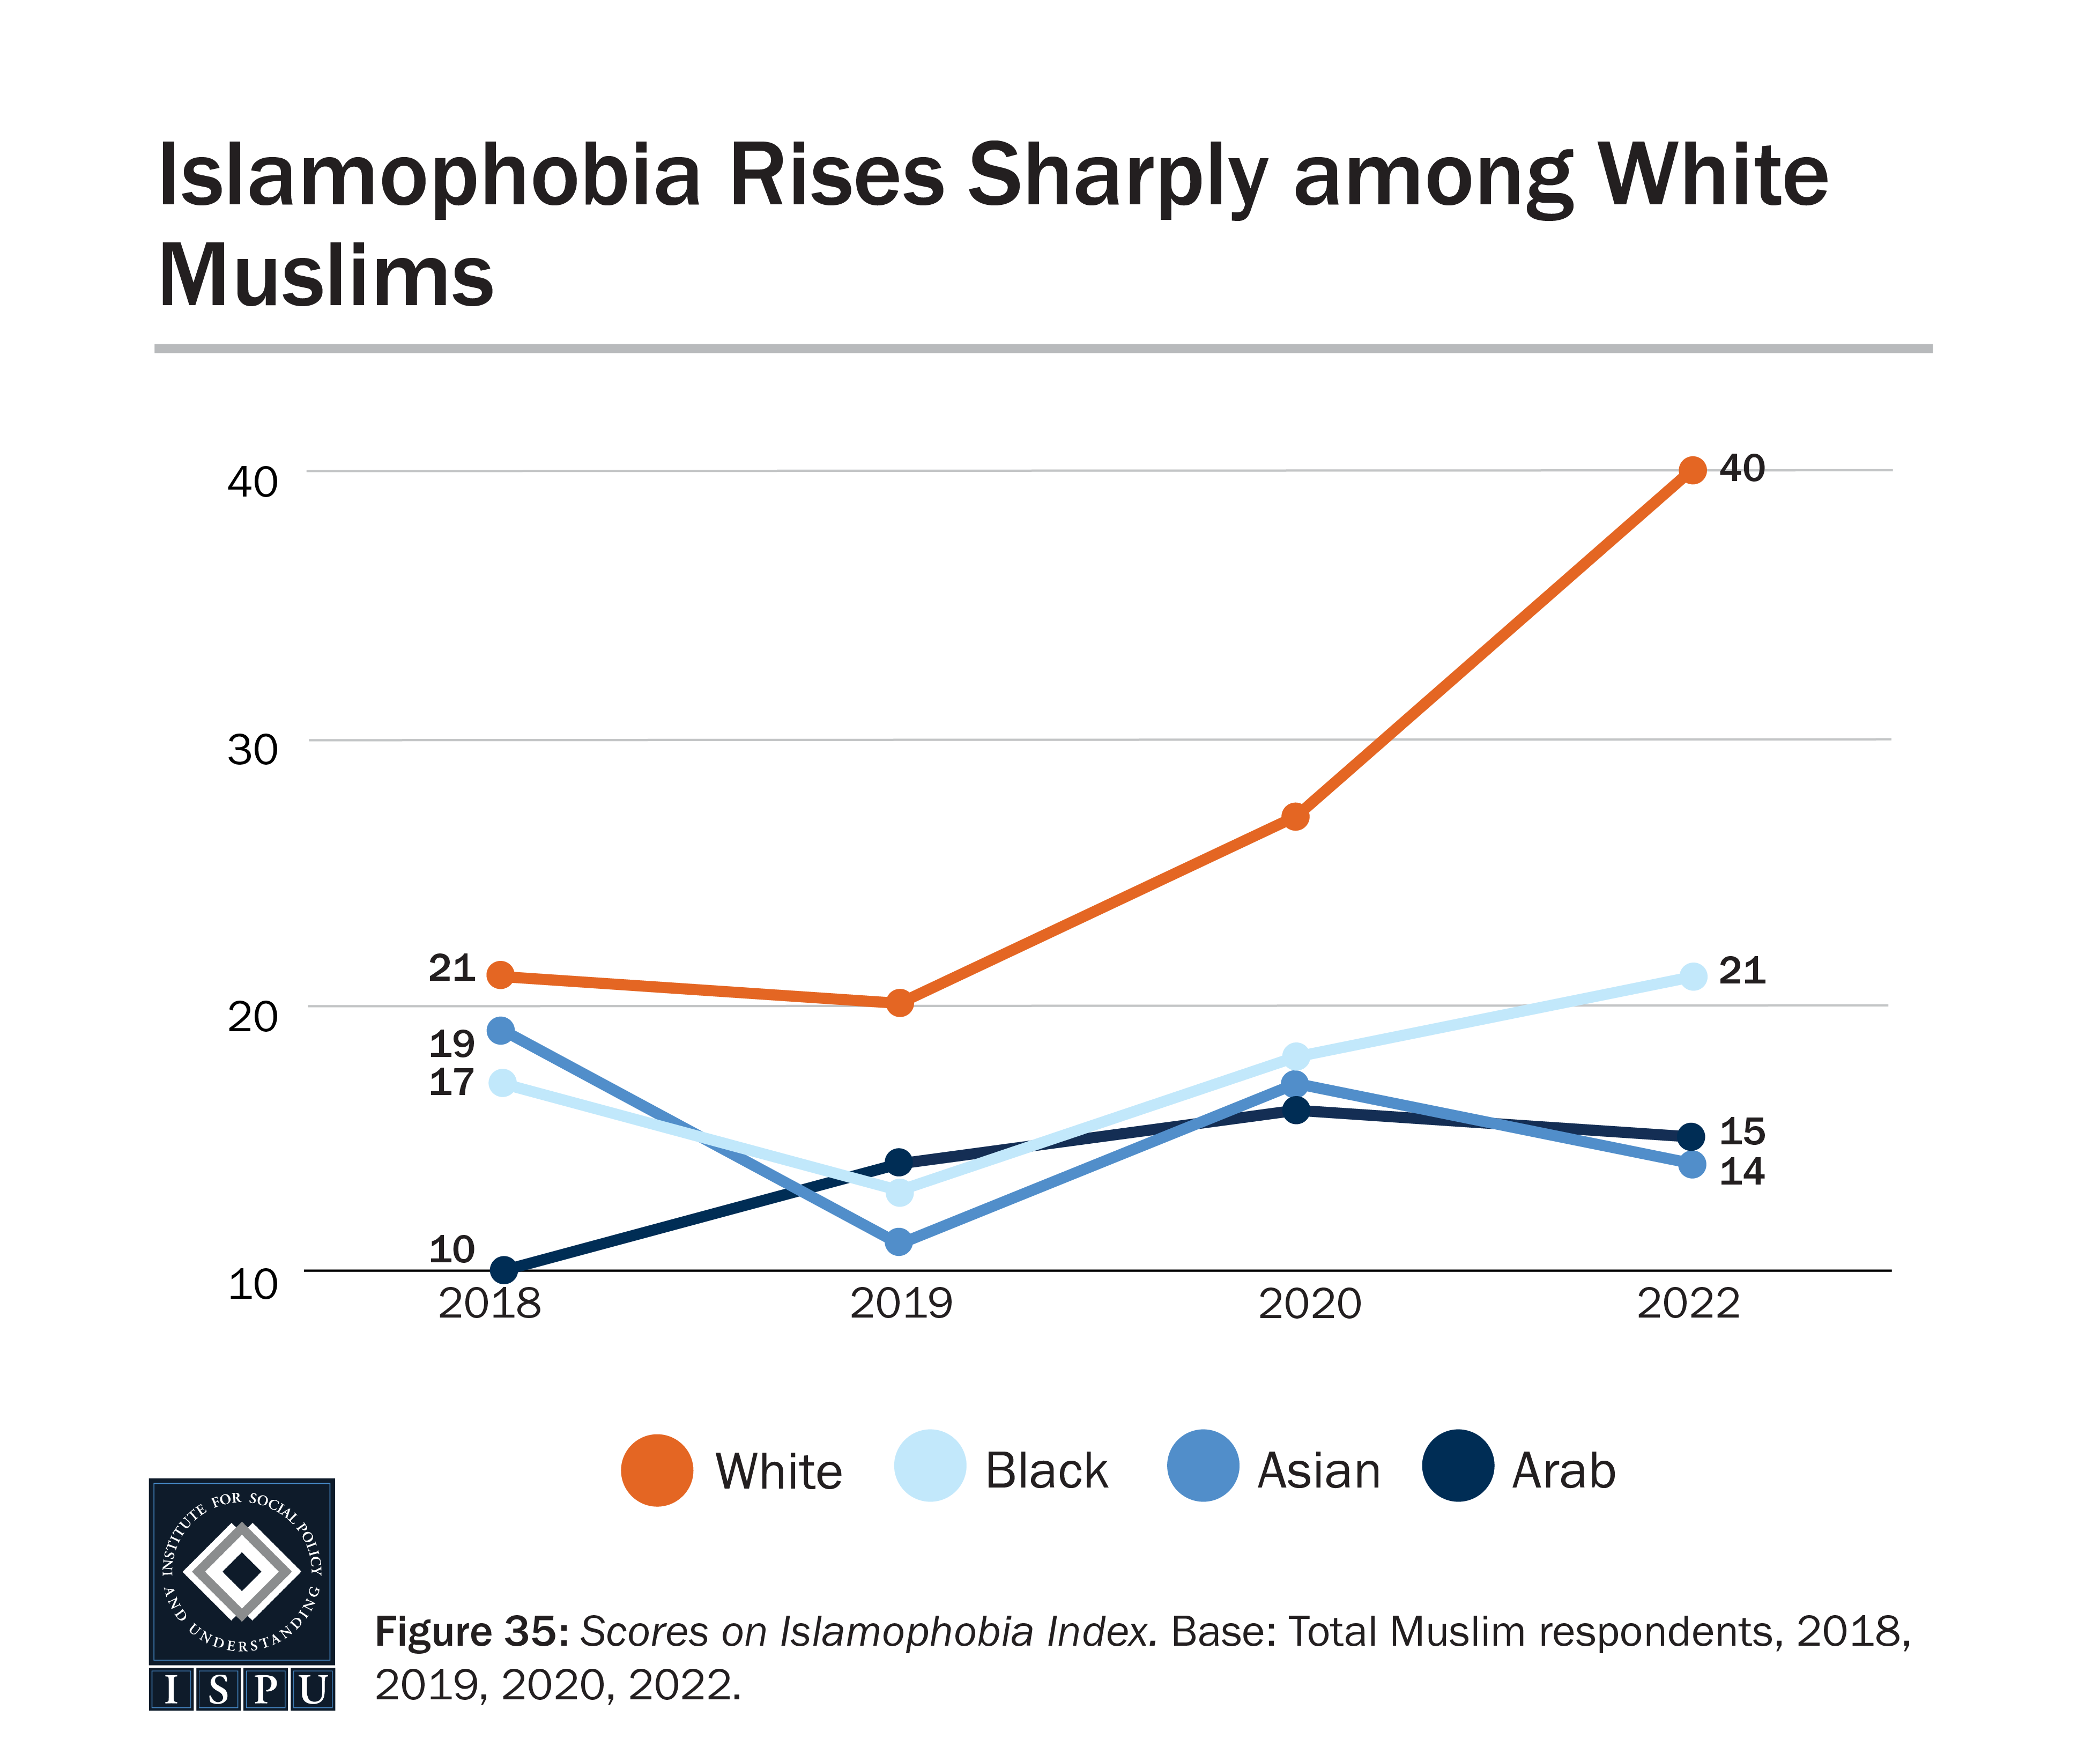 A line graph showing scores on the Islamophobia Index for Muslim racial/ethnic groups from 2018 - 2022.